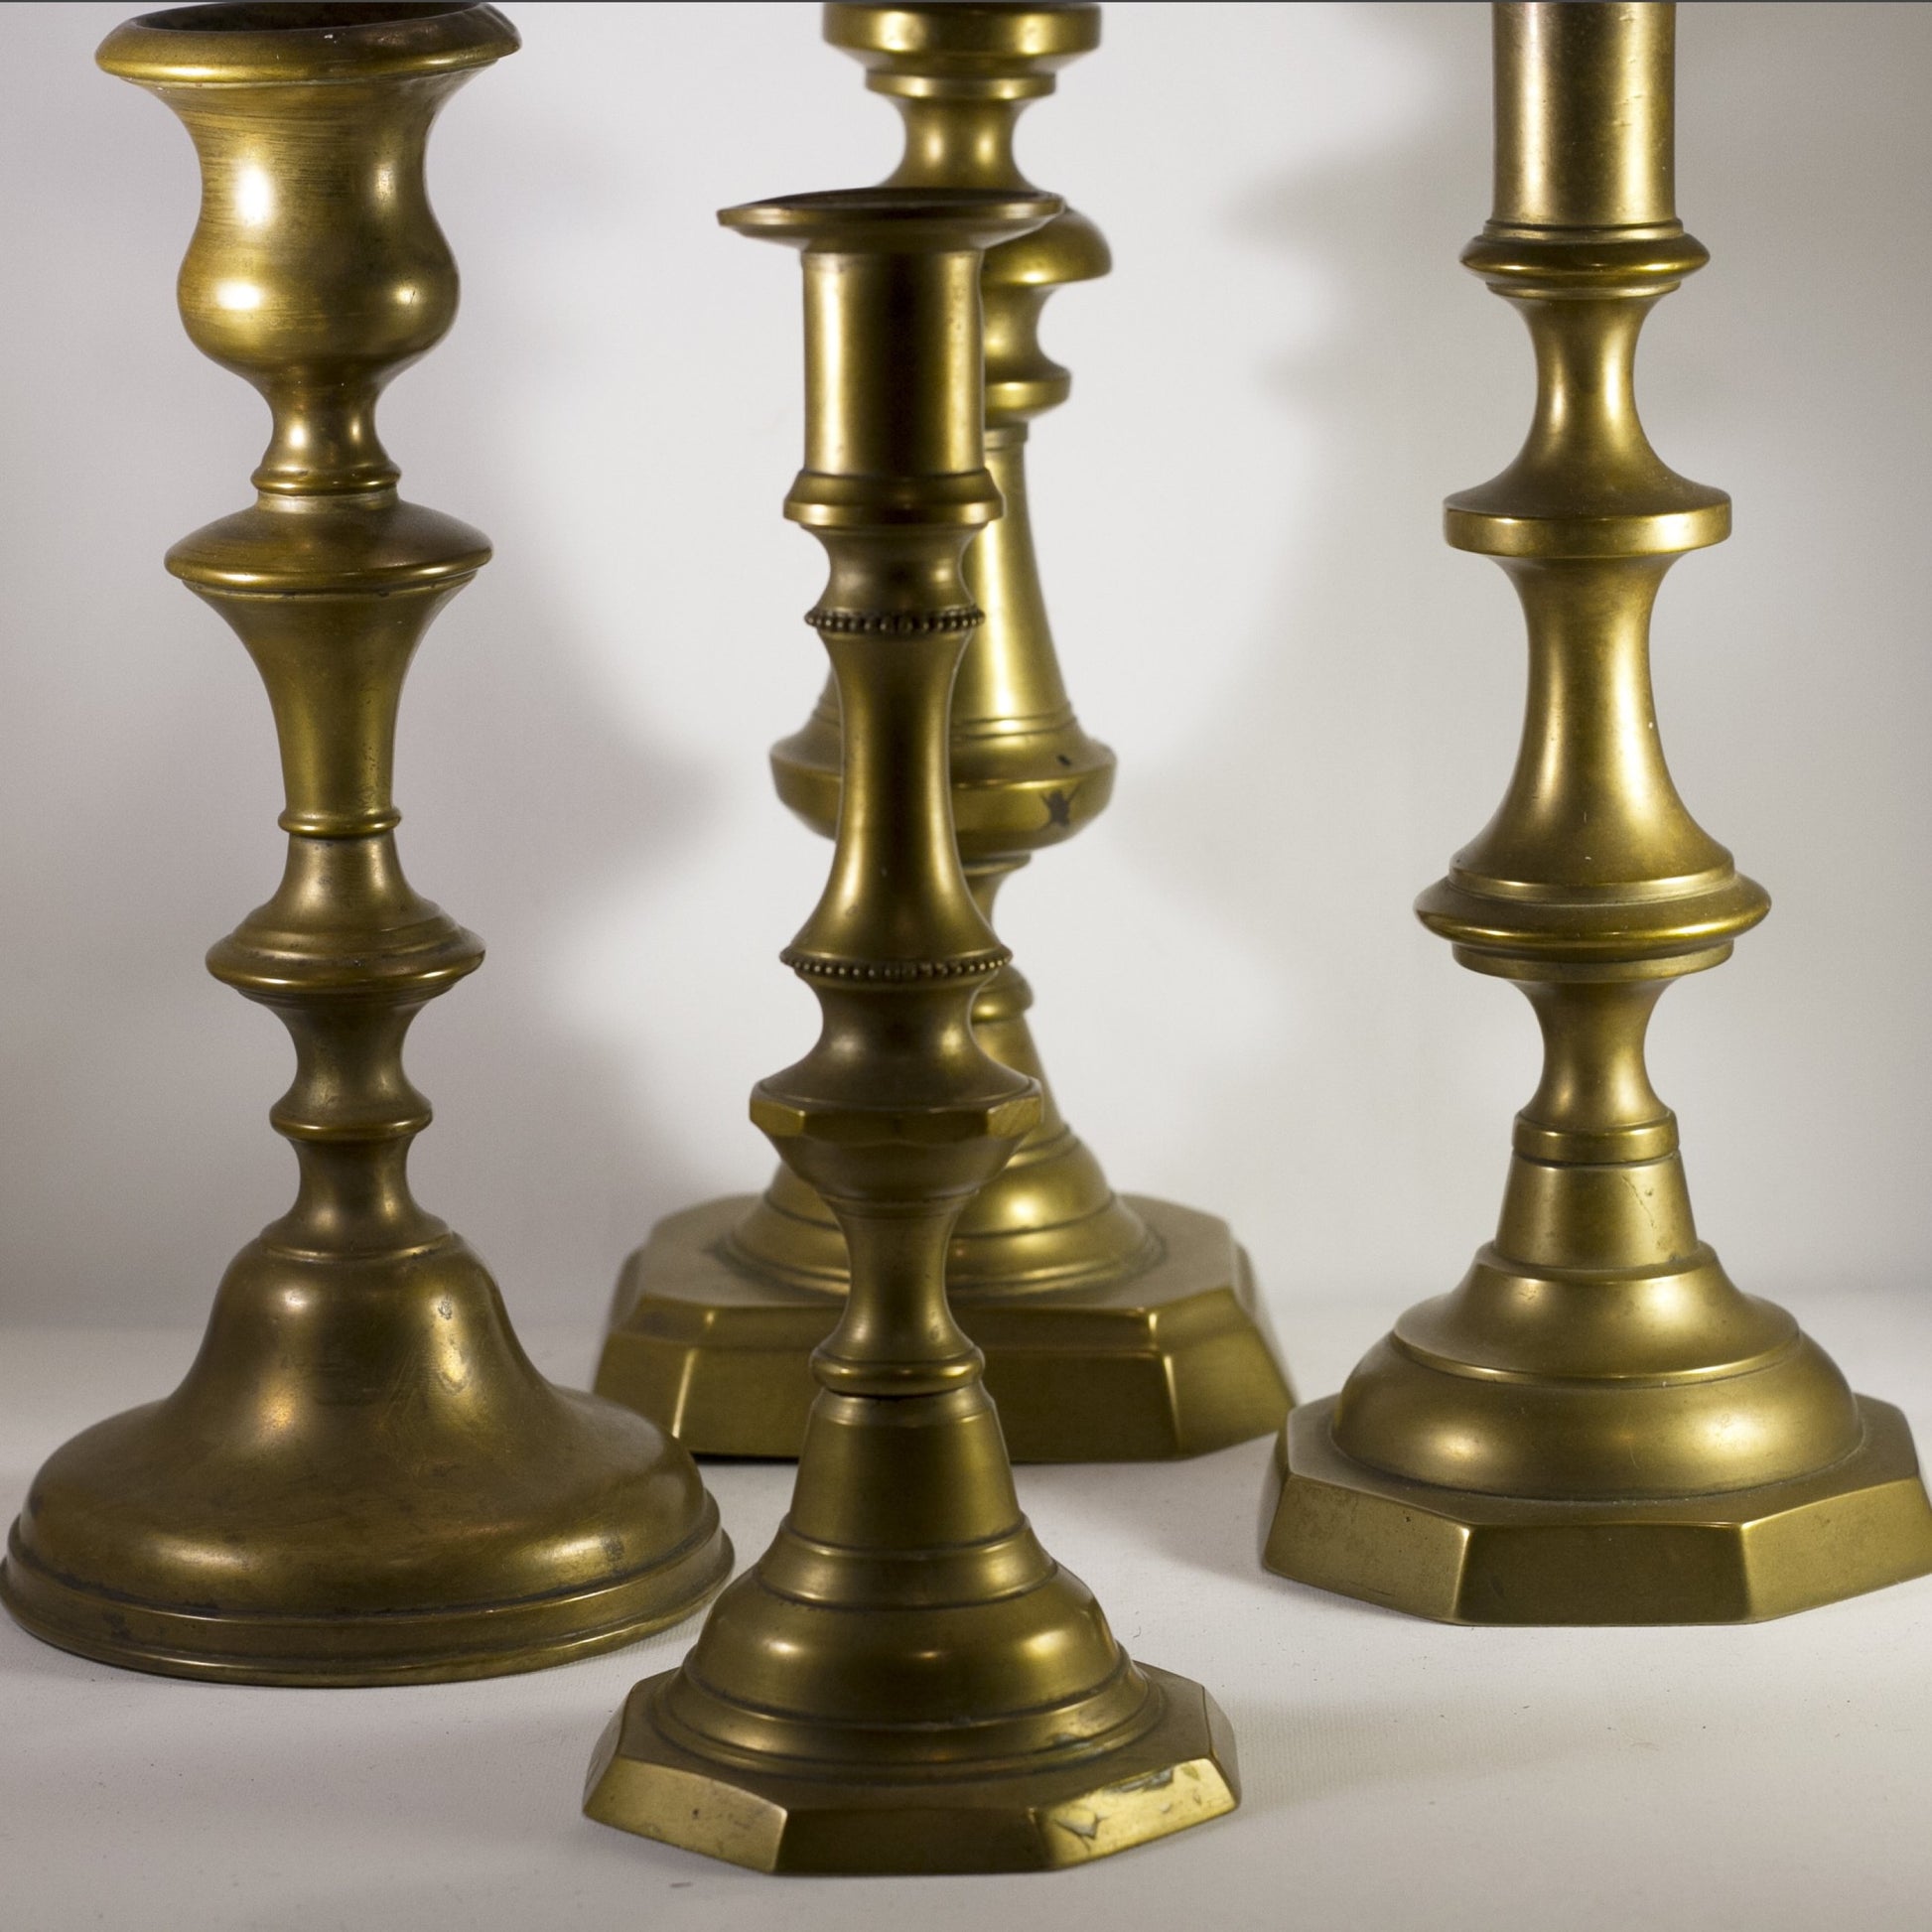 Set of Four Antique English Victorian BRASS CANDLESTICKS Late 19th Century